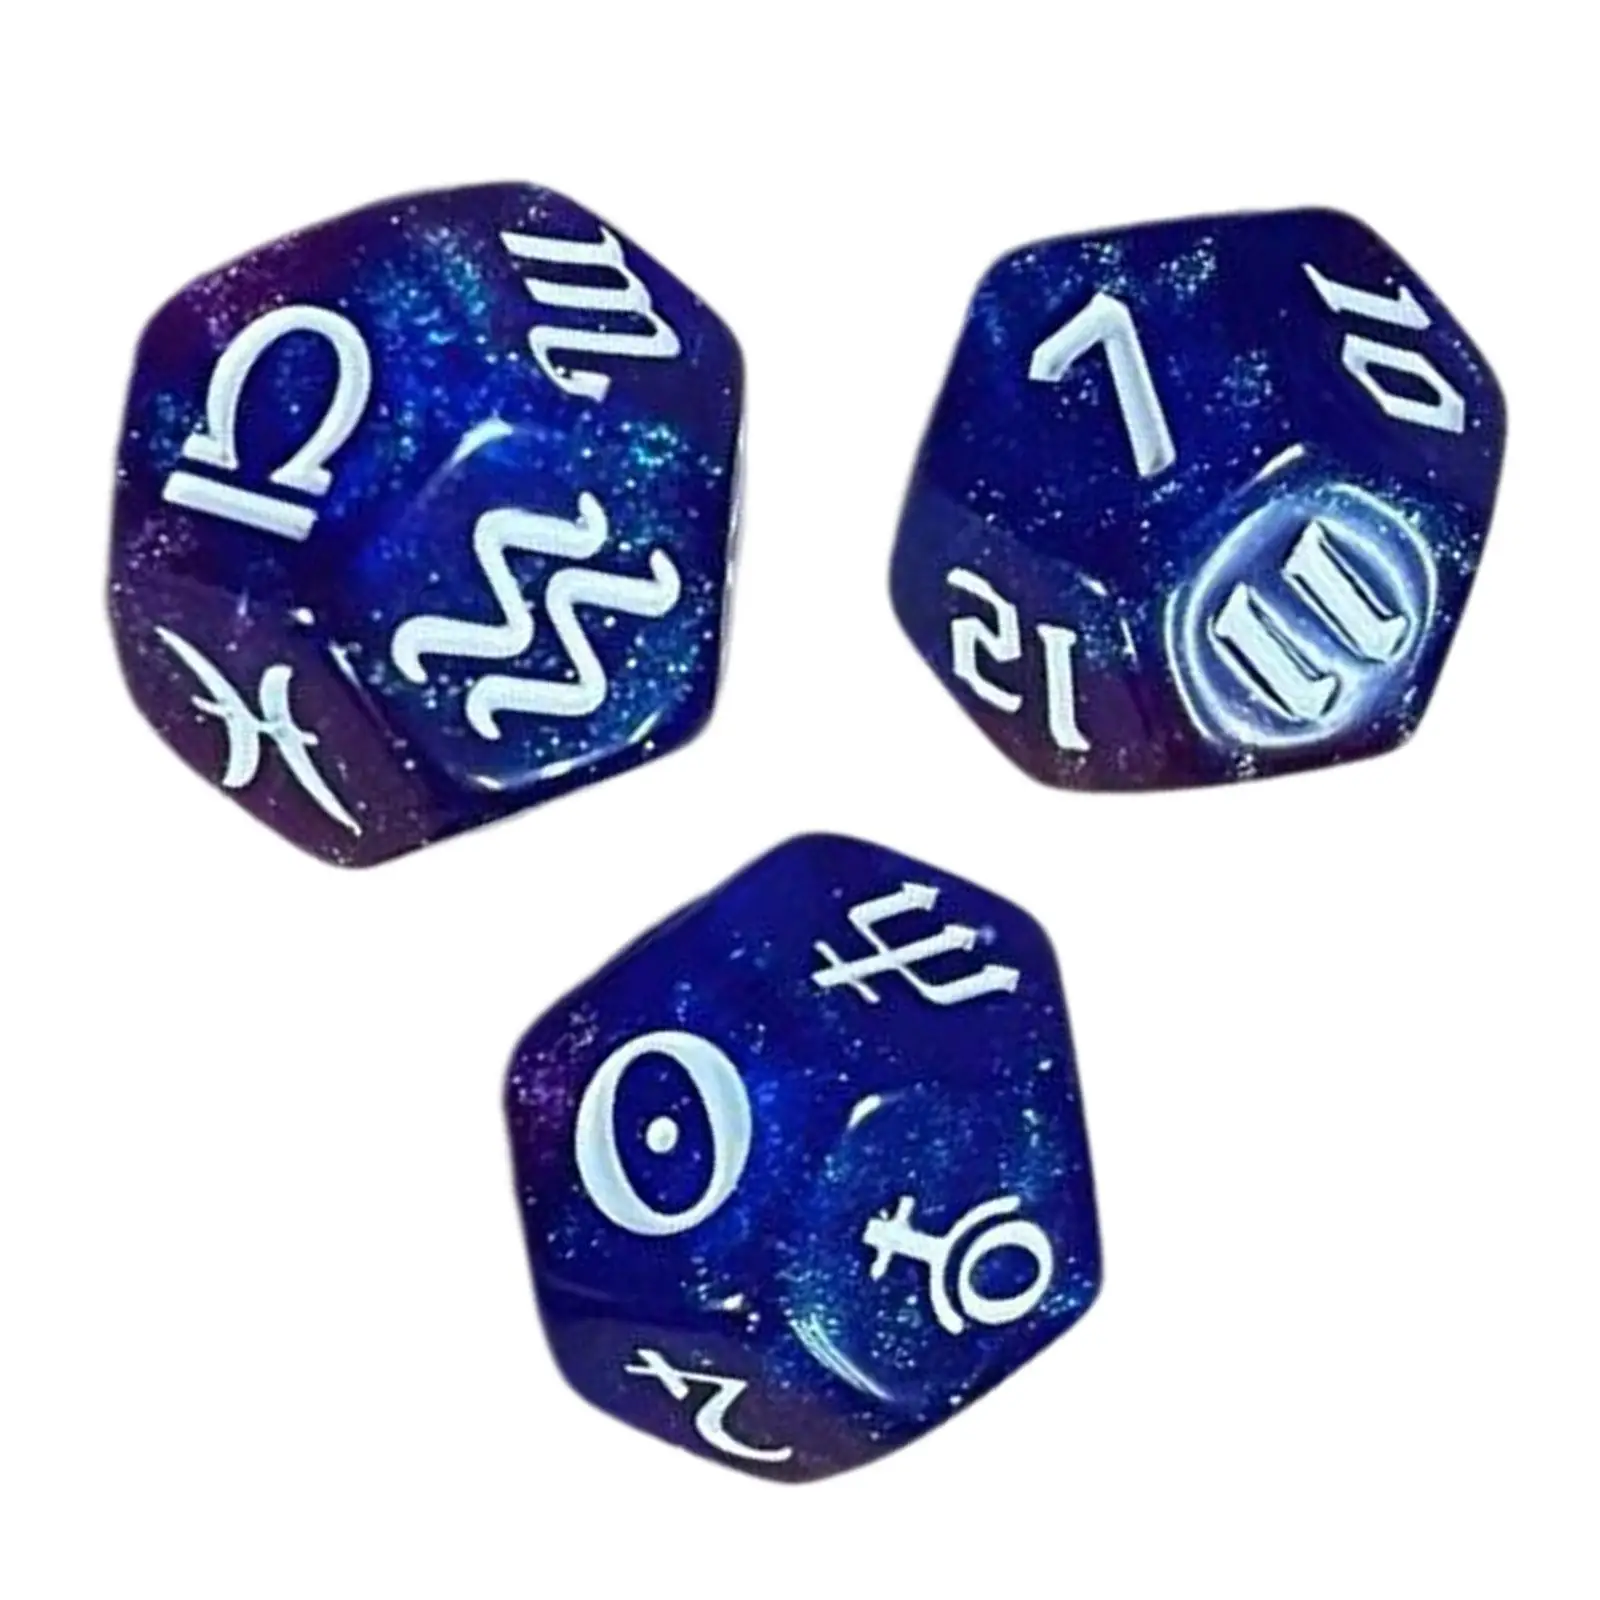 3x Constellation Dice Collectibles Polyhedral Dice for Family Gathering Cards Accessory Gaming Accessory